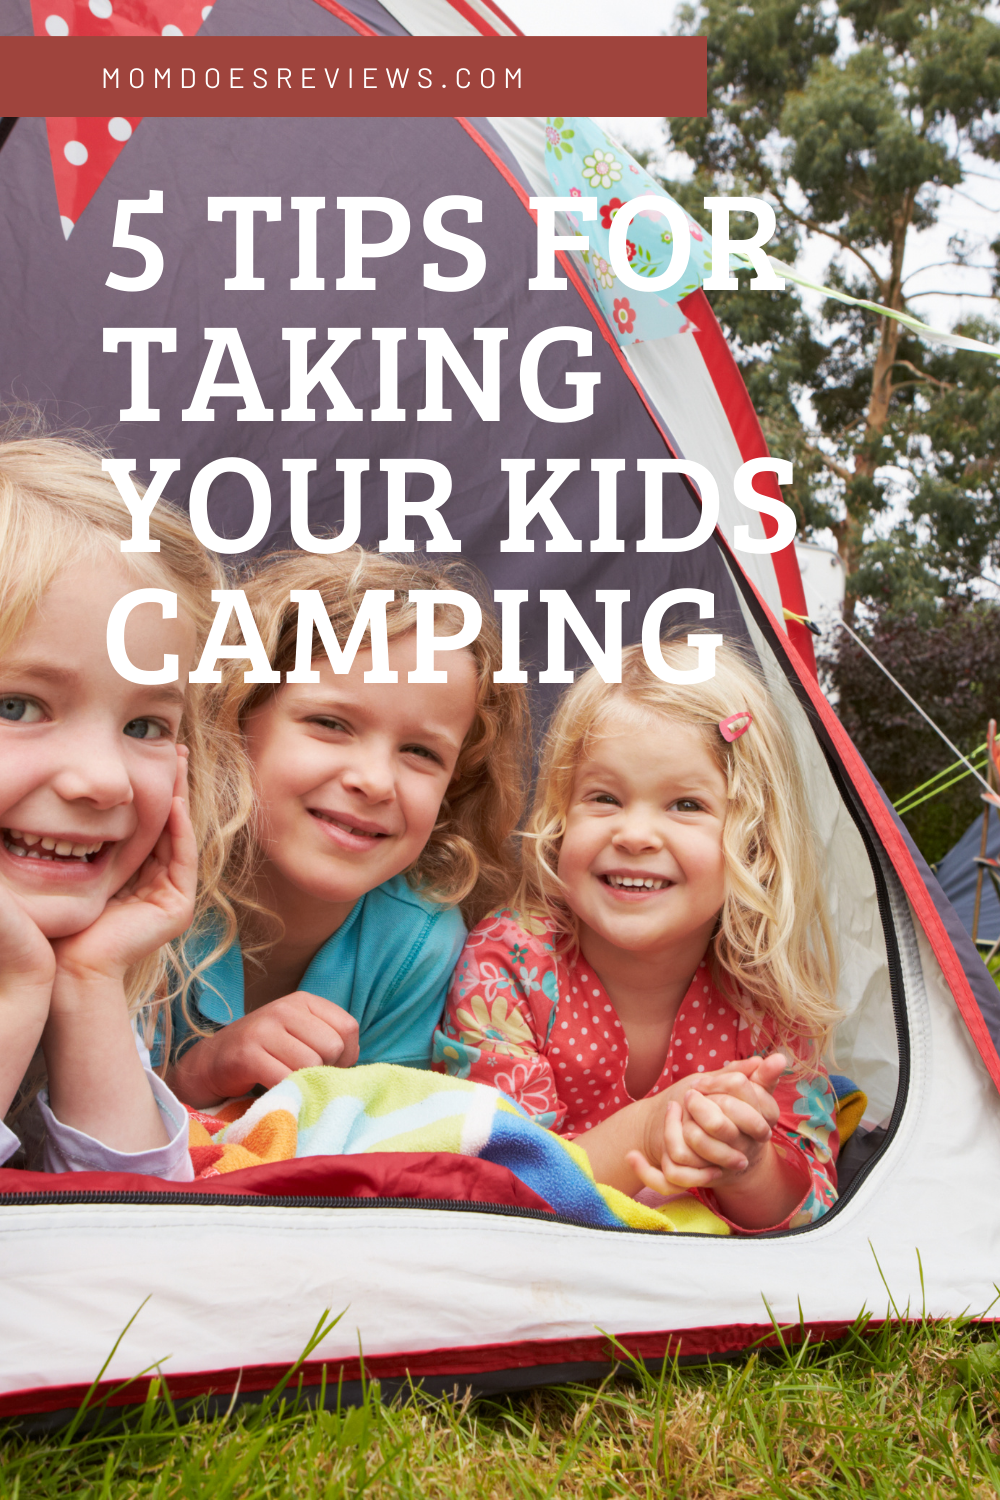 5 Tips for taking your kids camping